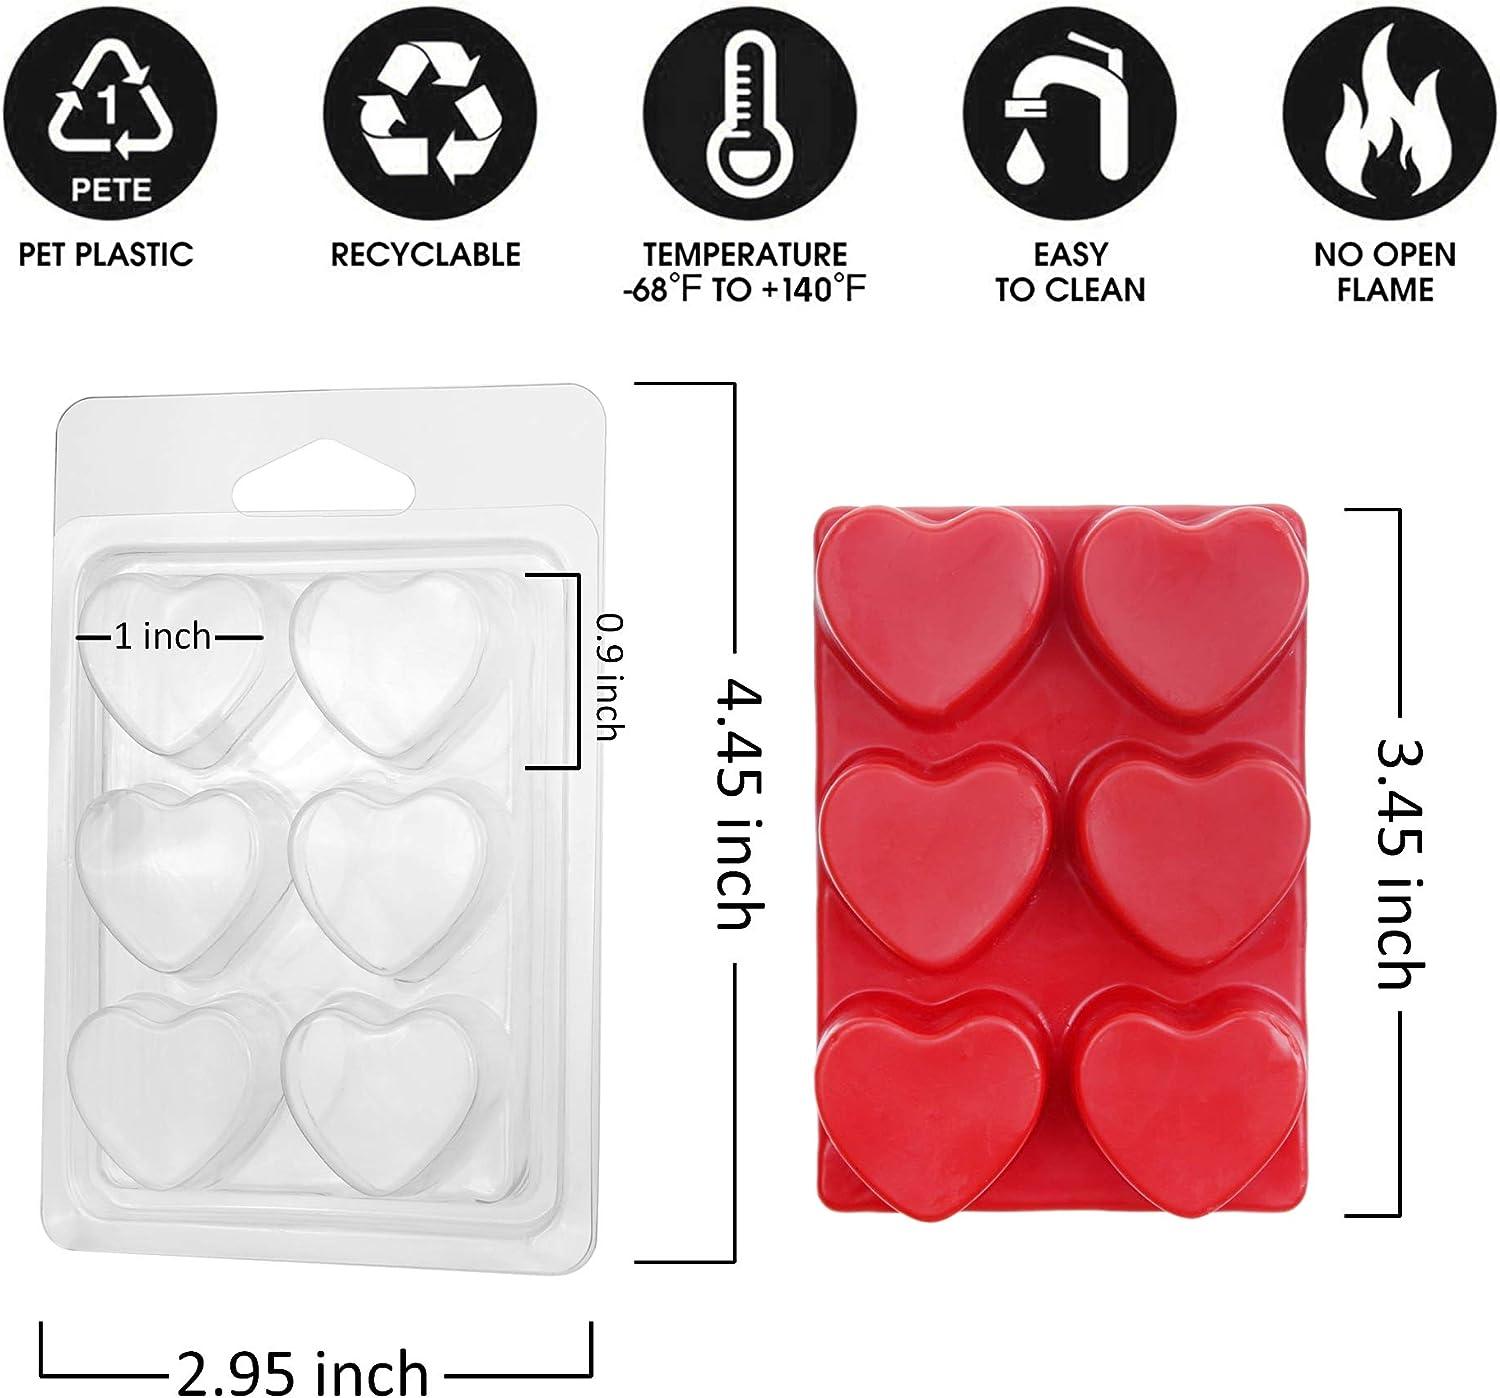  MILIVIXAY 600 Pieces Wax Melt Warning Labels Candle Warning  Labels Candle Warning Stickers for Clamshell, 1.8 x 1.5 inches